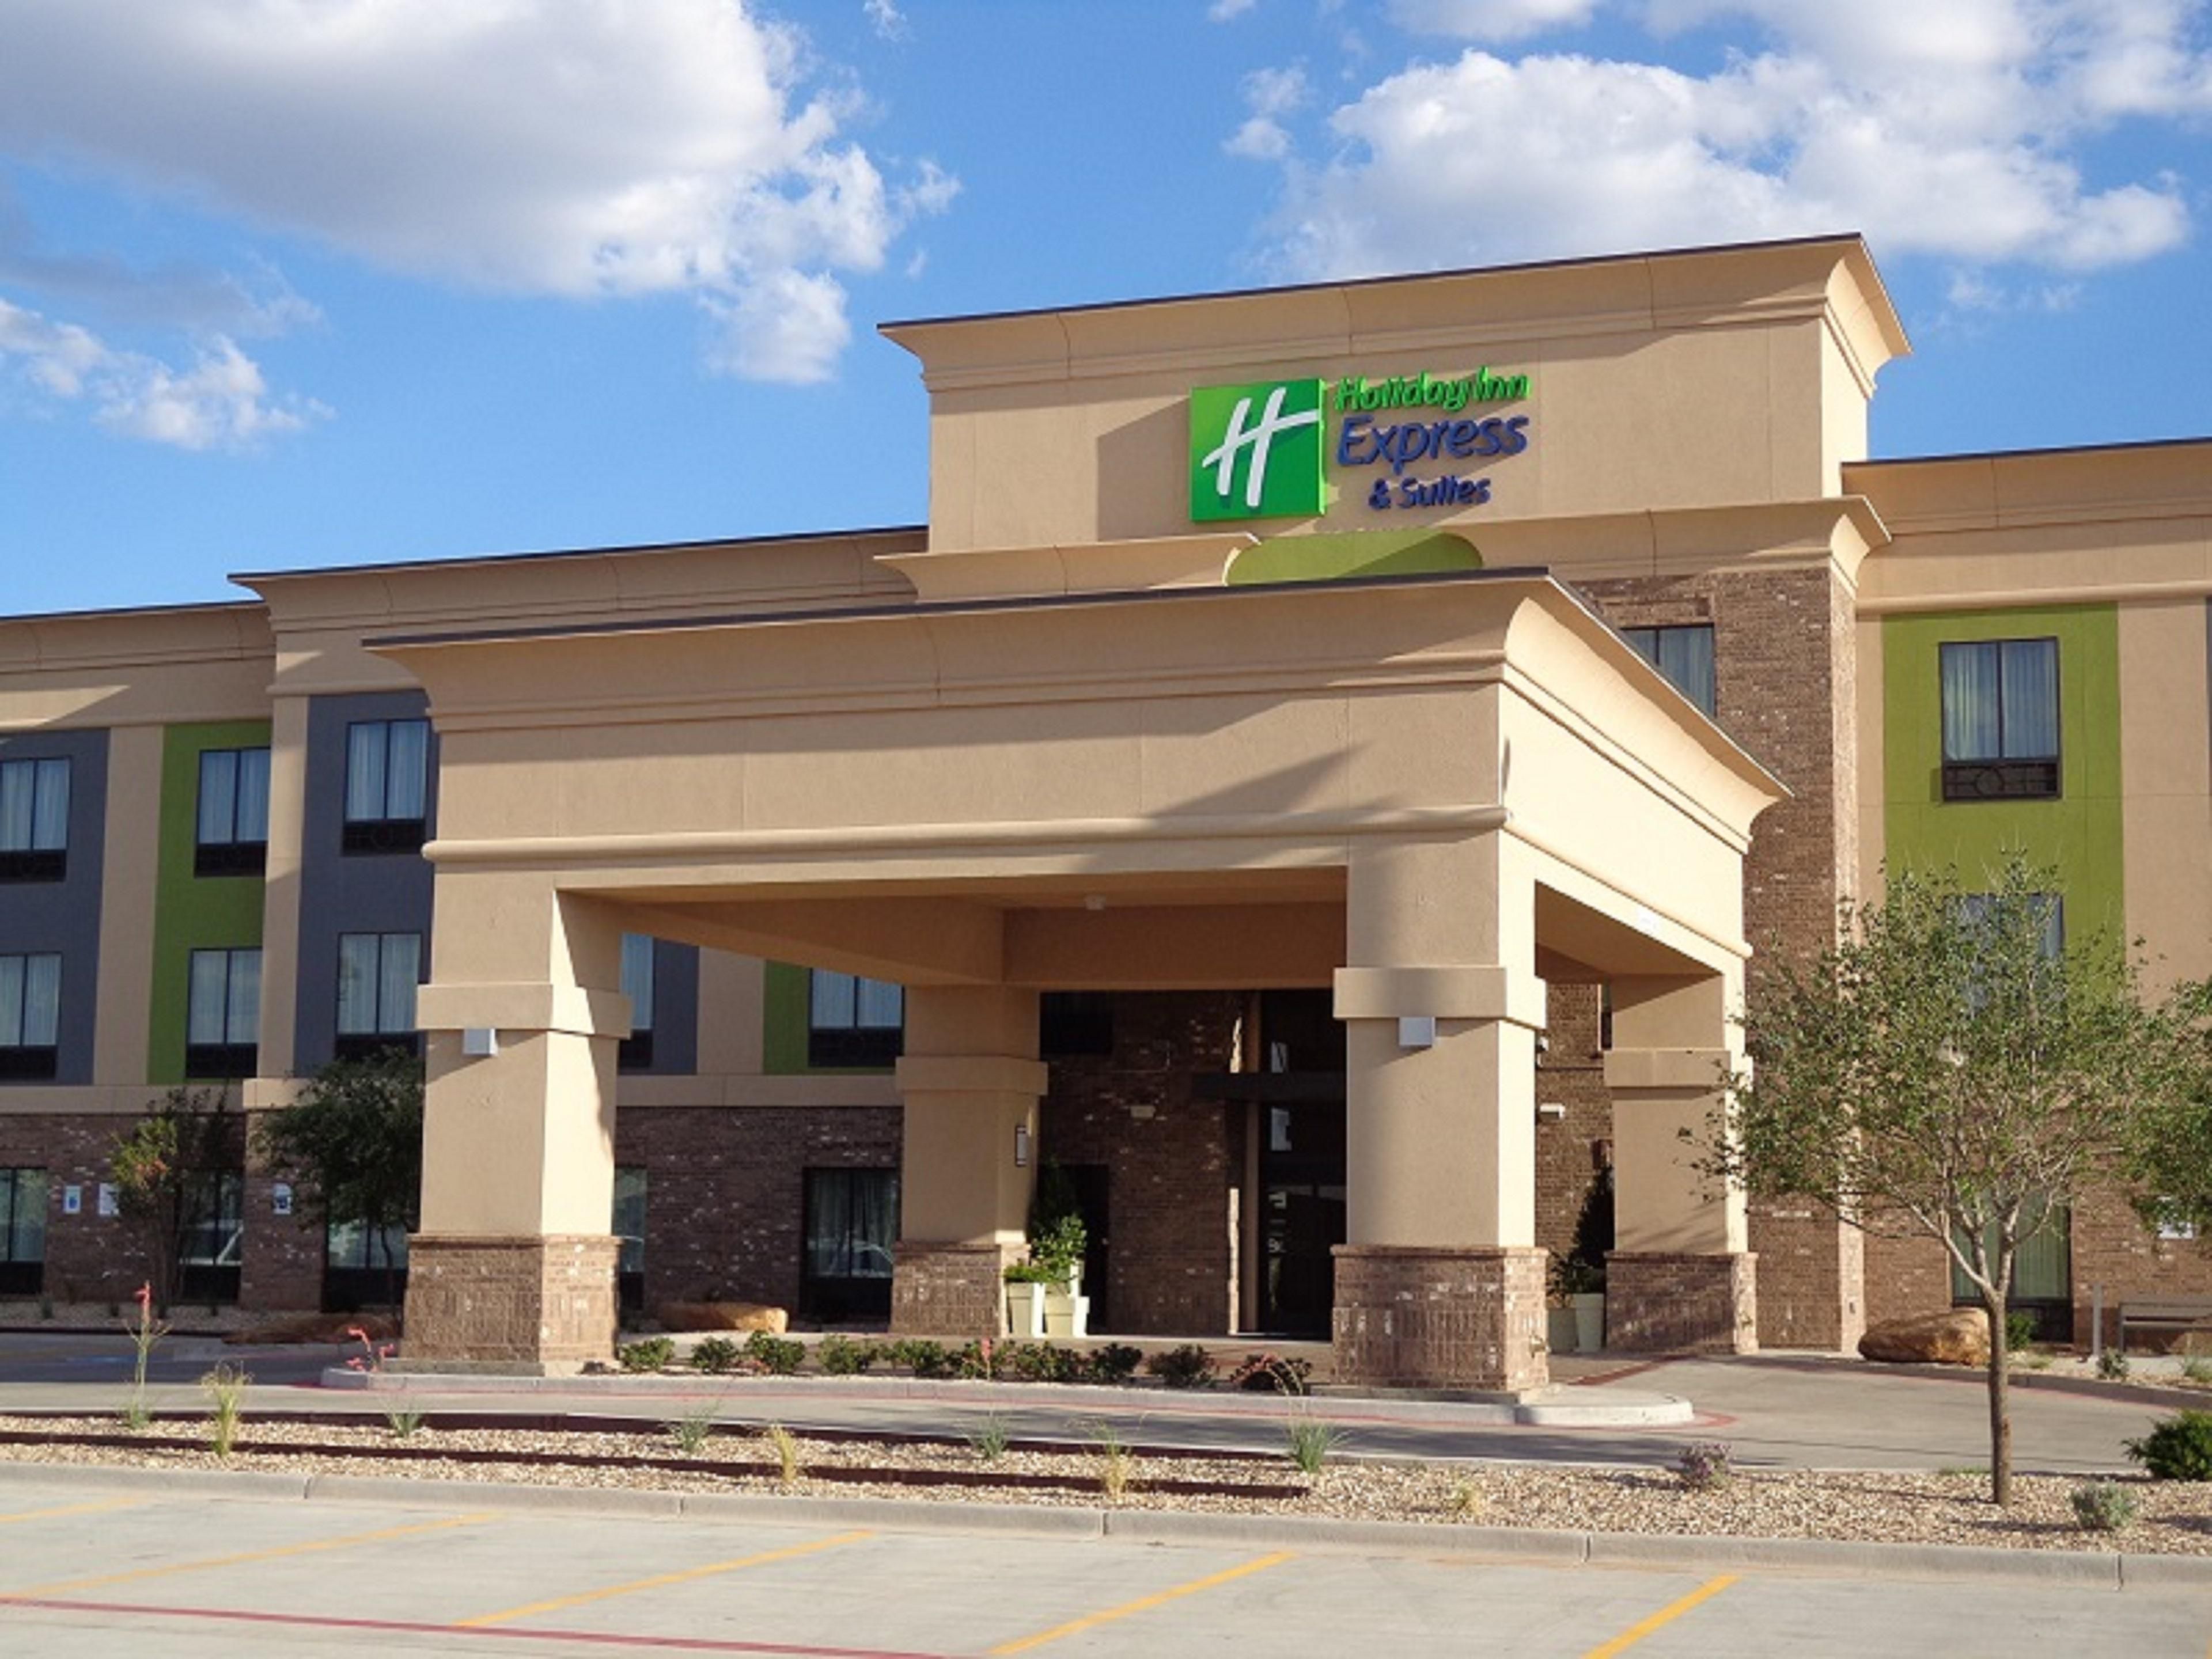 Holiday Inn Express And Suites Lubbock 4952868579 4x3